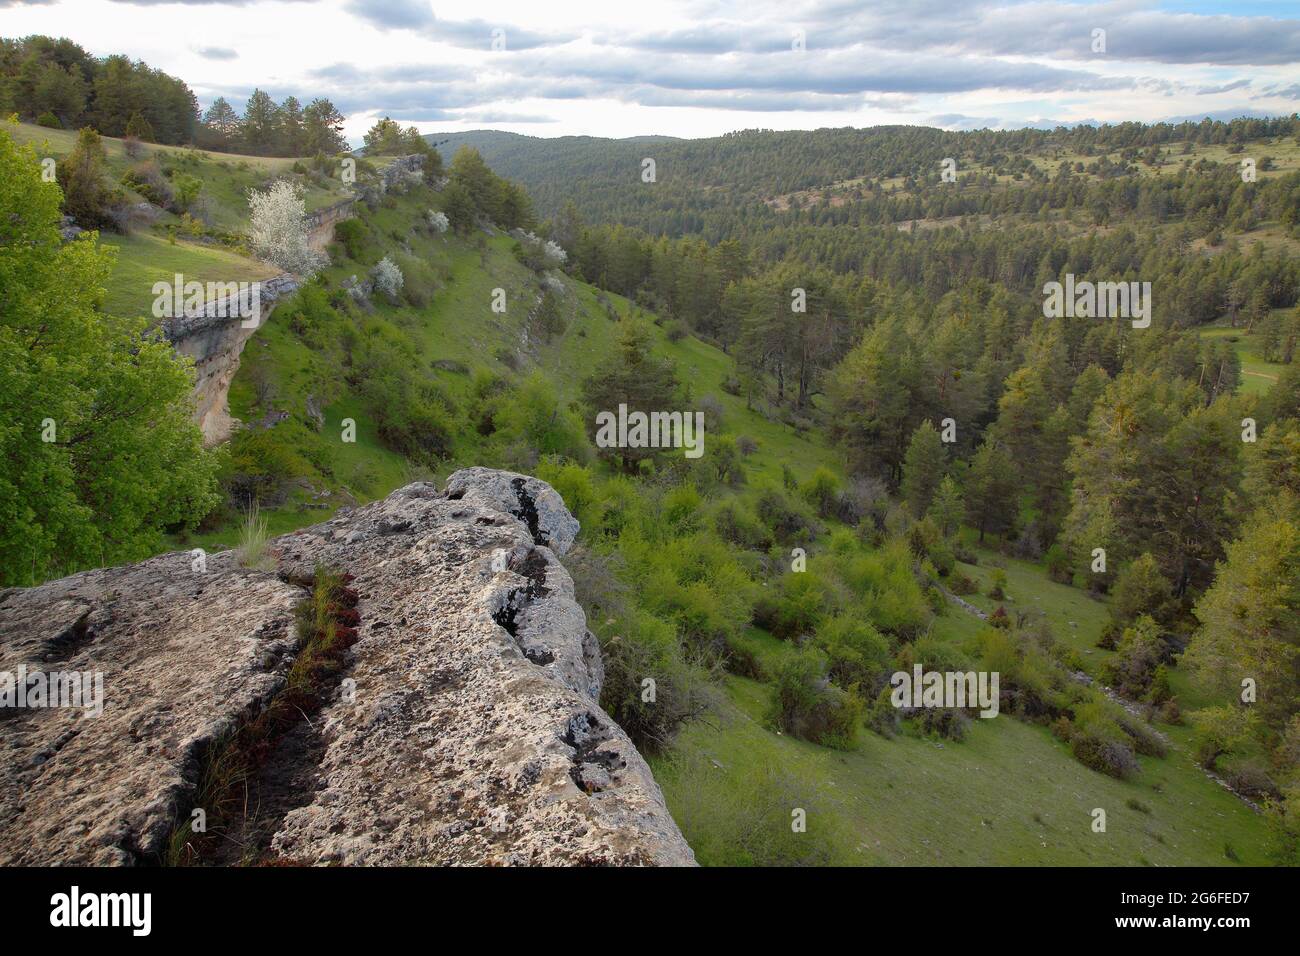 The Maíllo valley in the Sierra de Cuenca natural park Stock Photo - Alamy